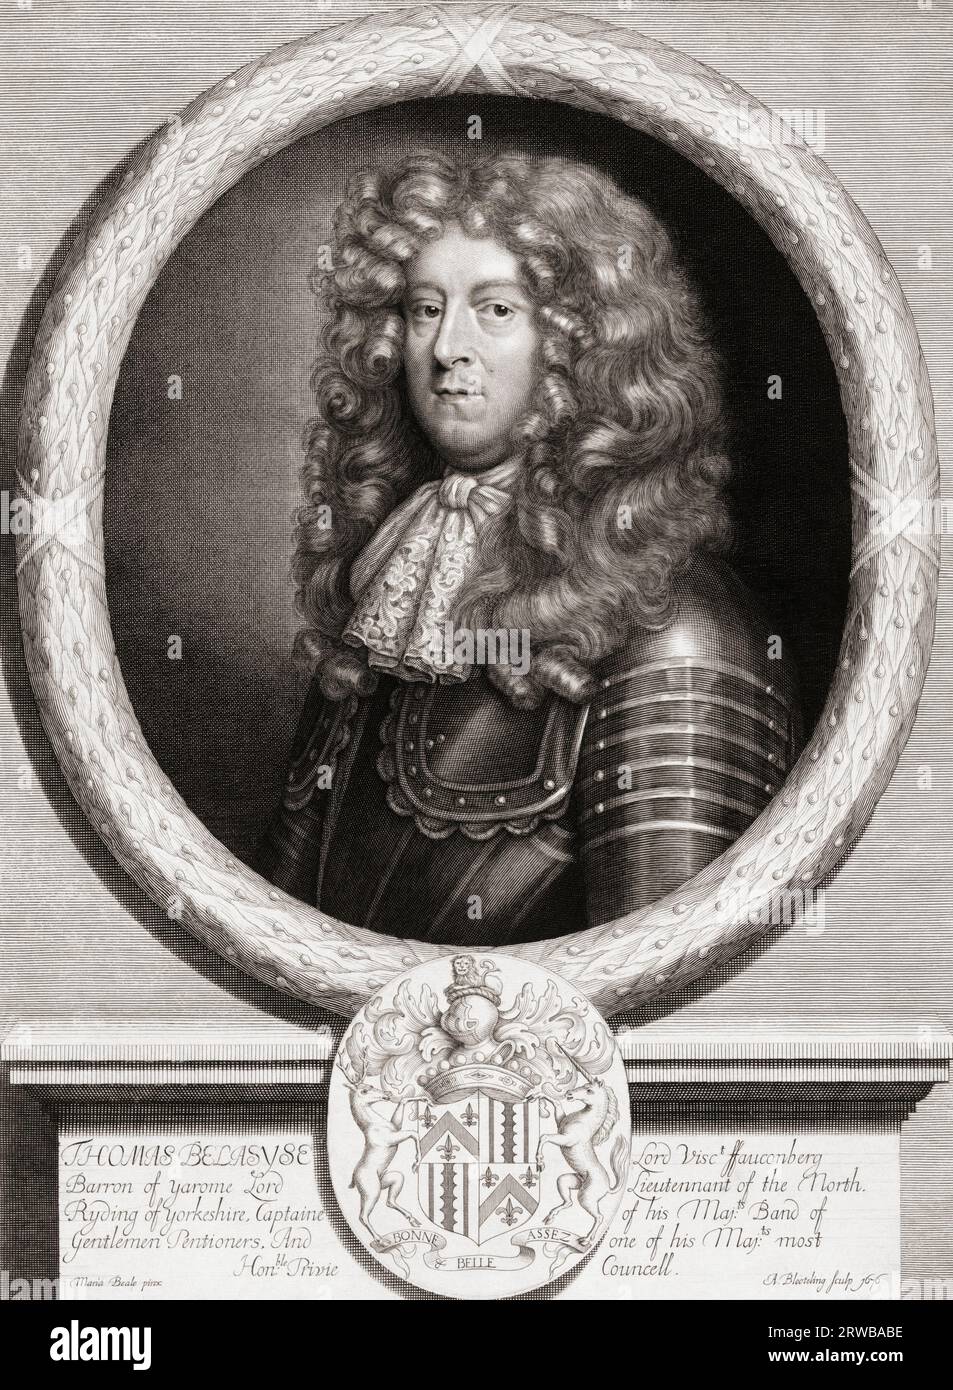 Thomas Belasyse, 1st Earl Fauconberg, circa 1627 - 1700.  A Parliamentarian during the English Civil War, he became a Royalist after the Restoration of the Monarchy.  After the print by Abraham Bloteling from the painting by Mary Beale. Stock Photo